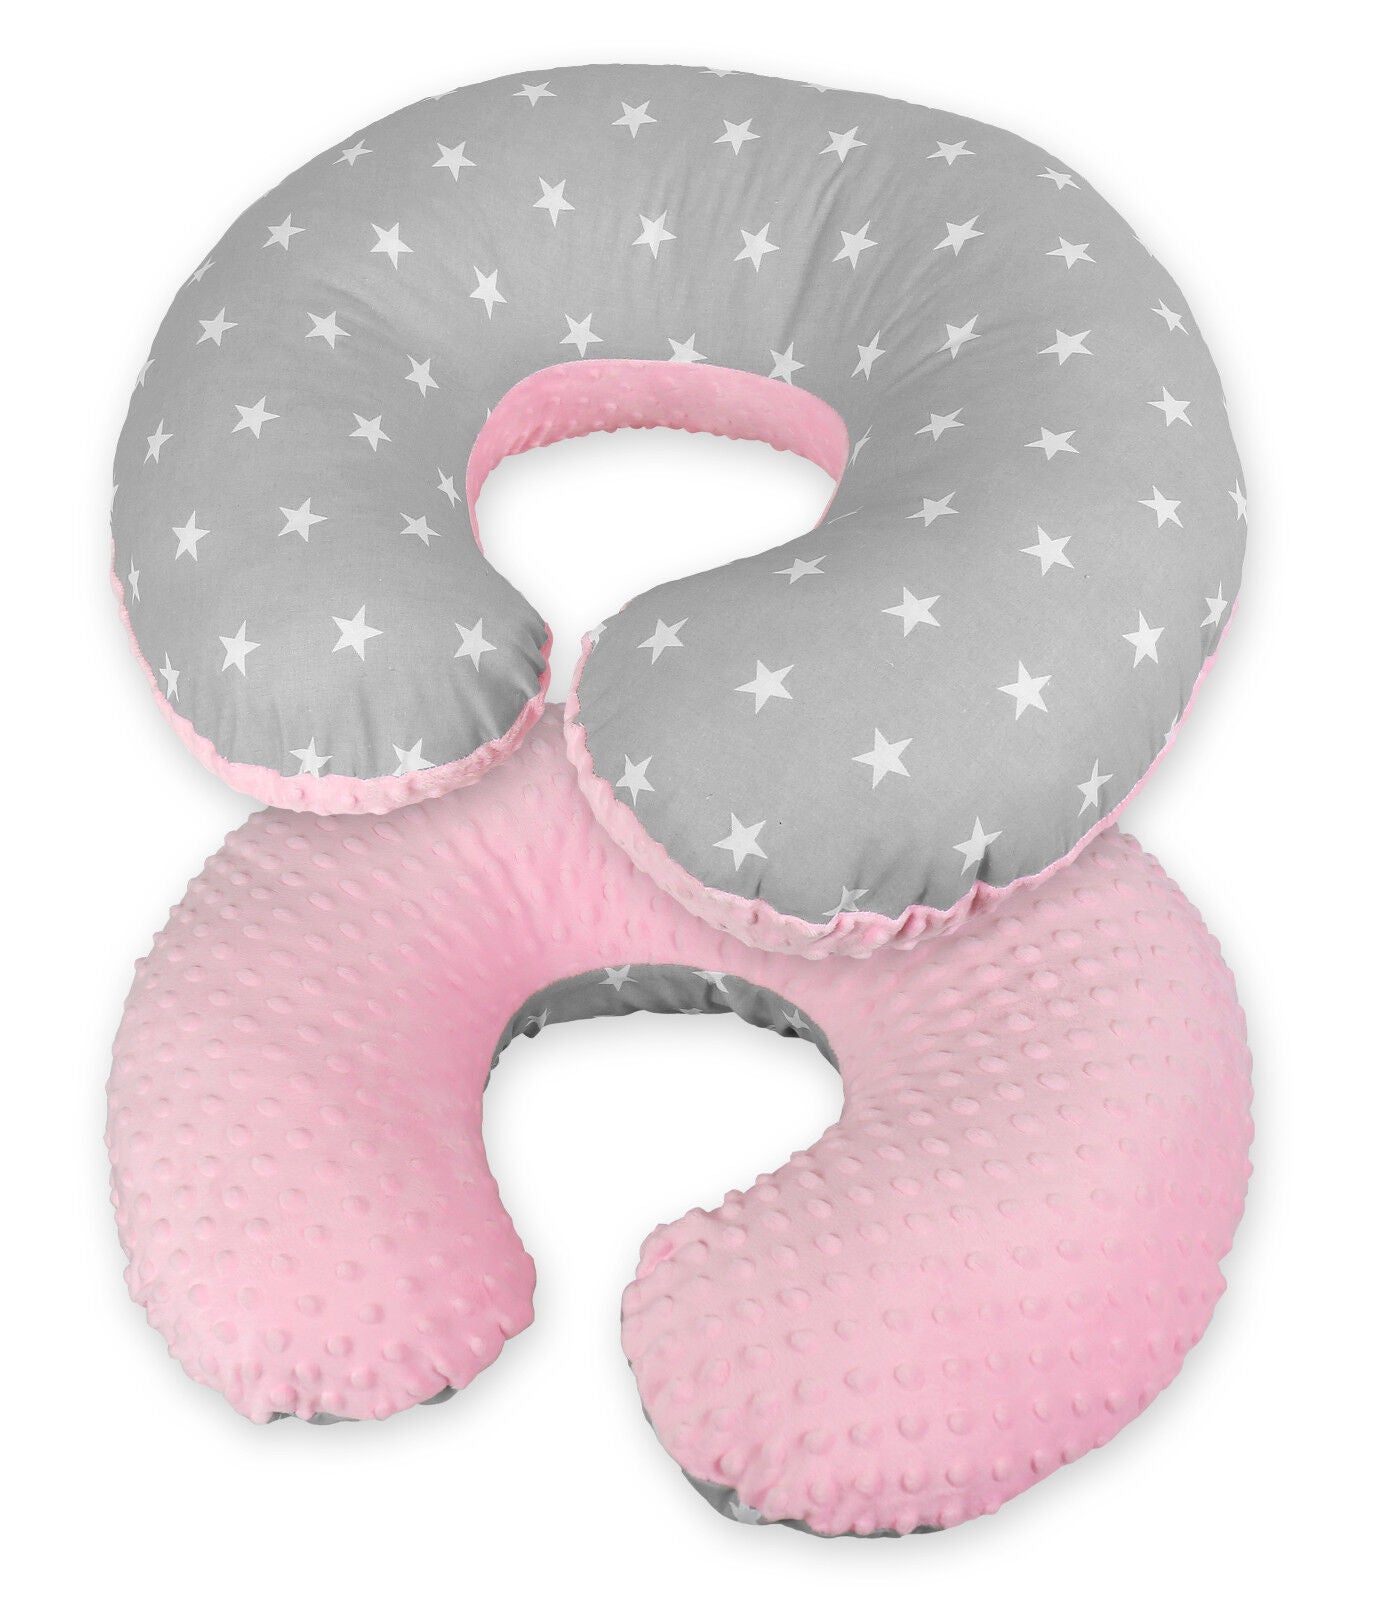 Baby Feeding Pillow Dimple Nursing Breastfeeding Pregnancy Pillow+Cover Pink/ Small white on Grey